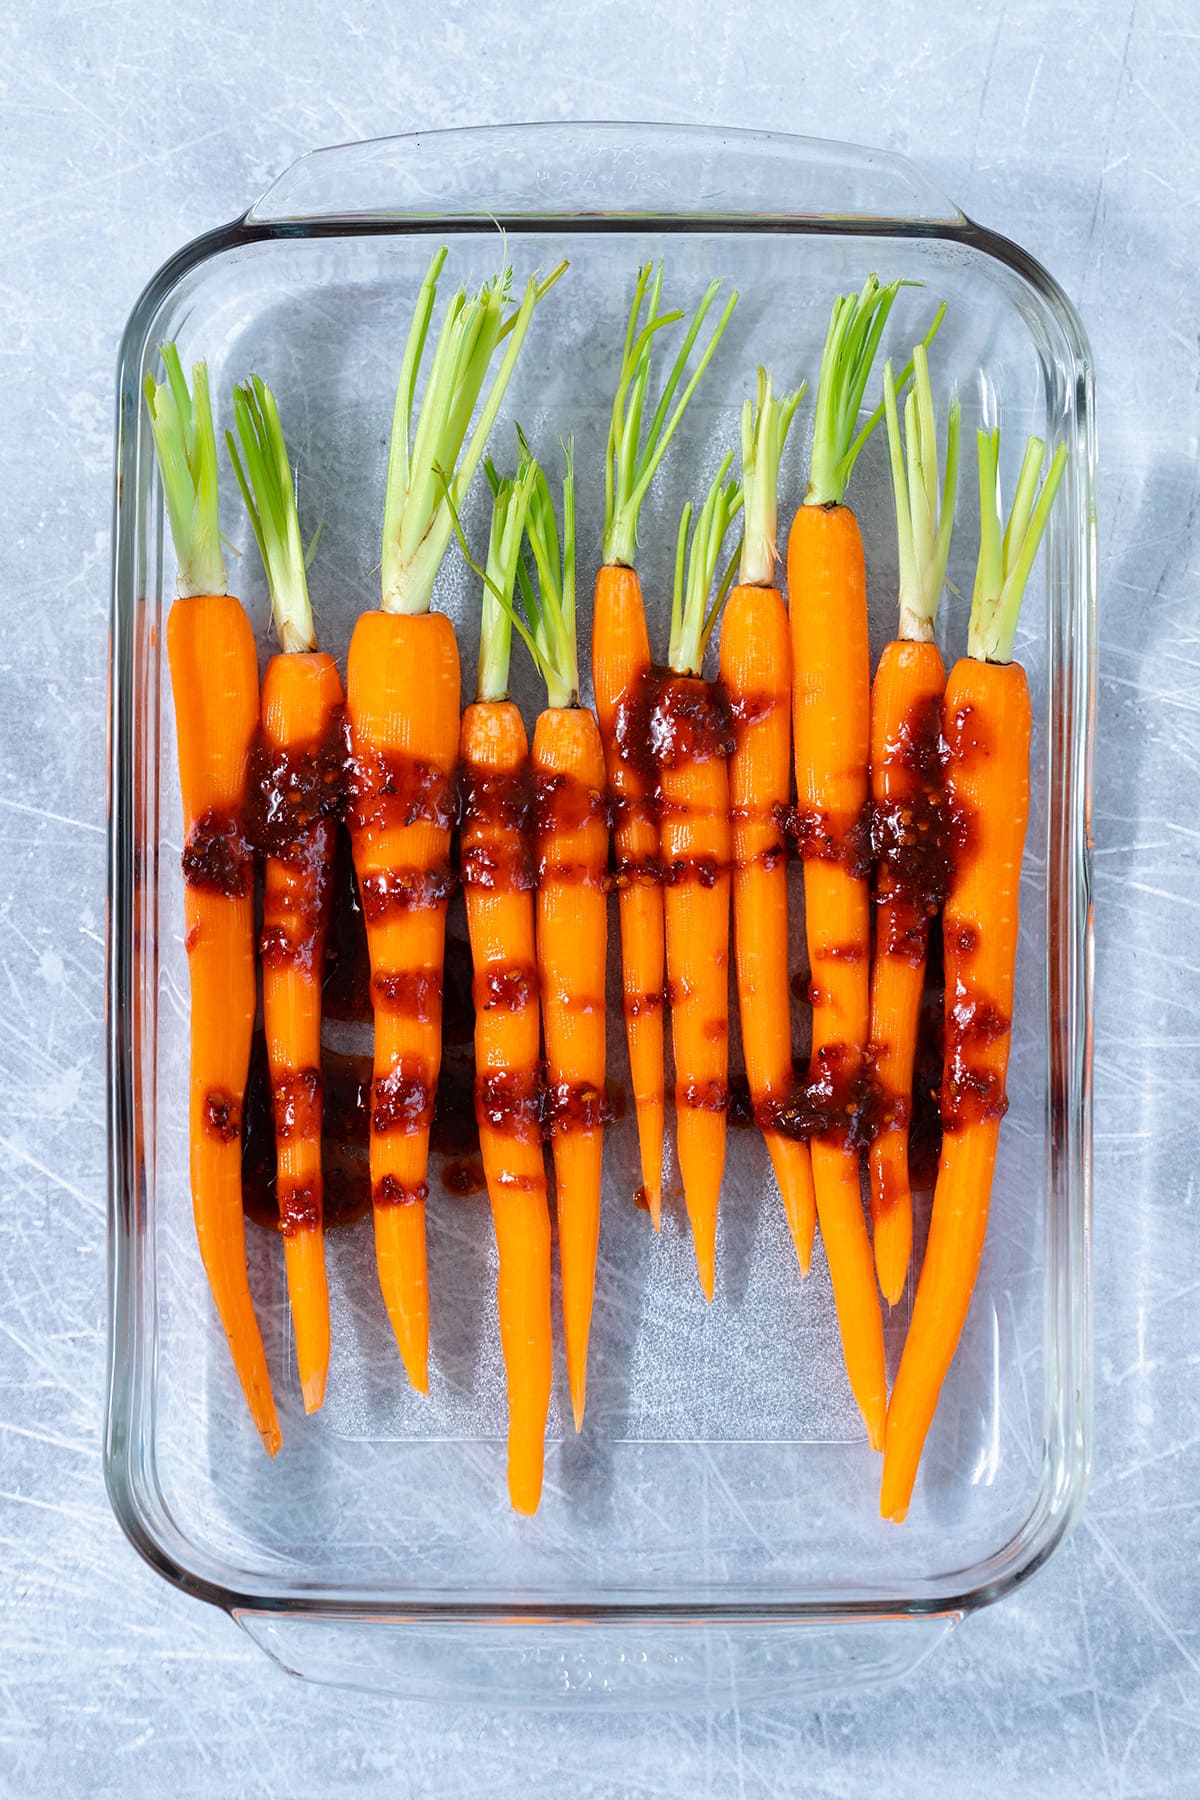 Raw peeled carrots in a glass baking dish with harissa sauce drizzled on them. Dish on a blue scratched metal background.